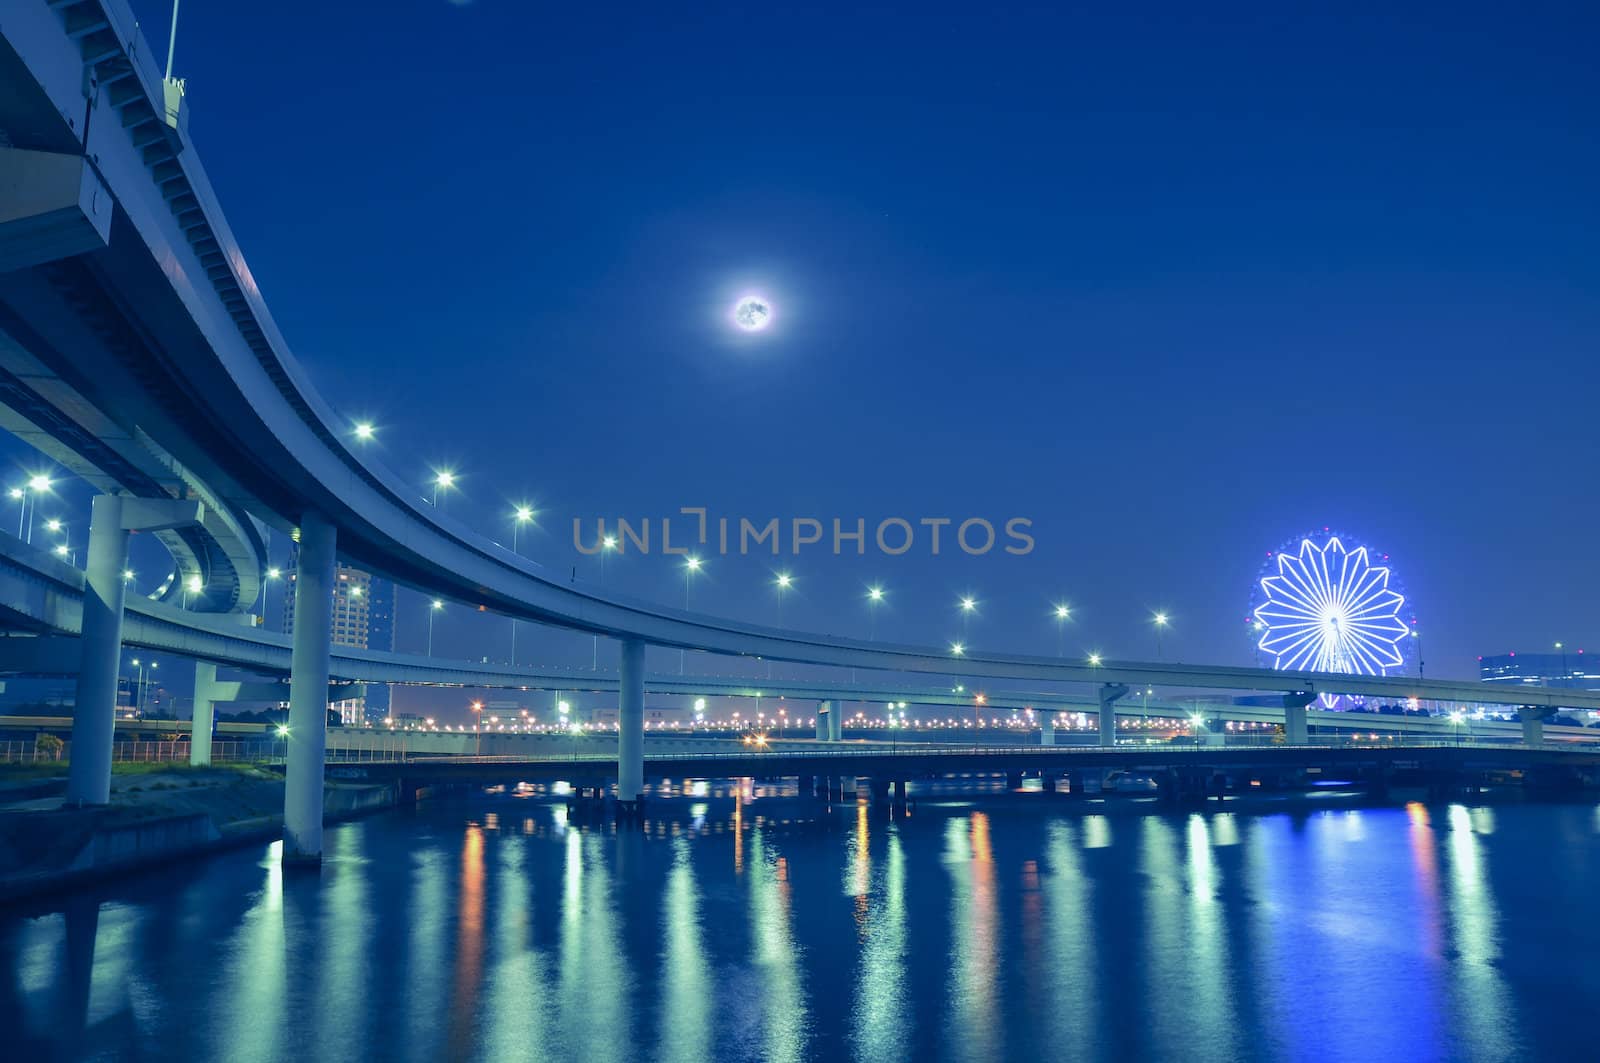  hanged-up highway road over Tokyo bay waters at night time with moon and ferris-wheel illumination on backward